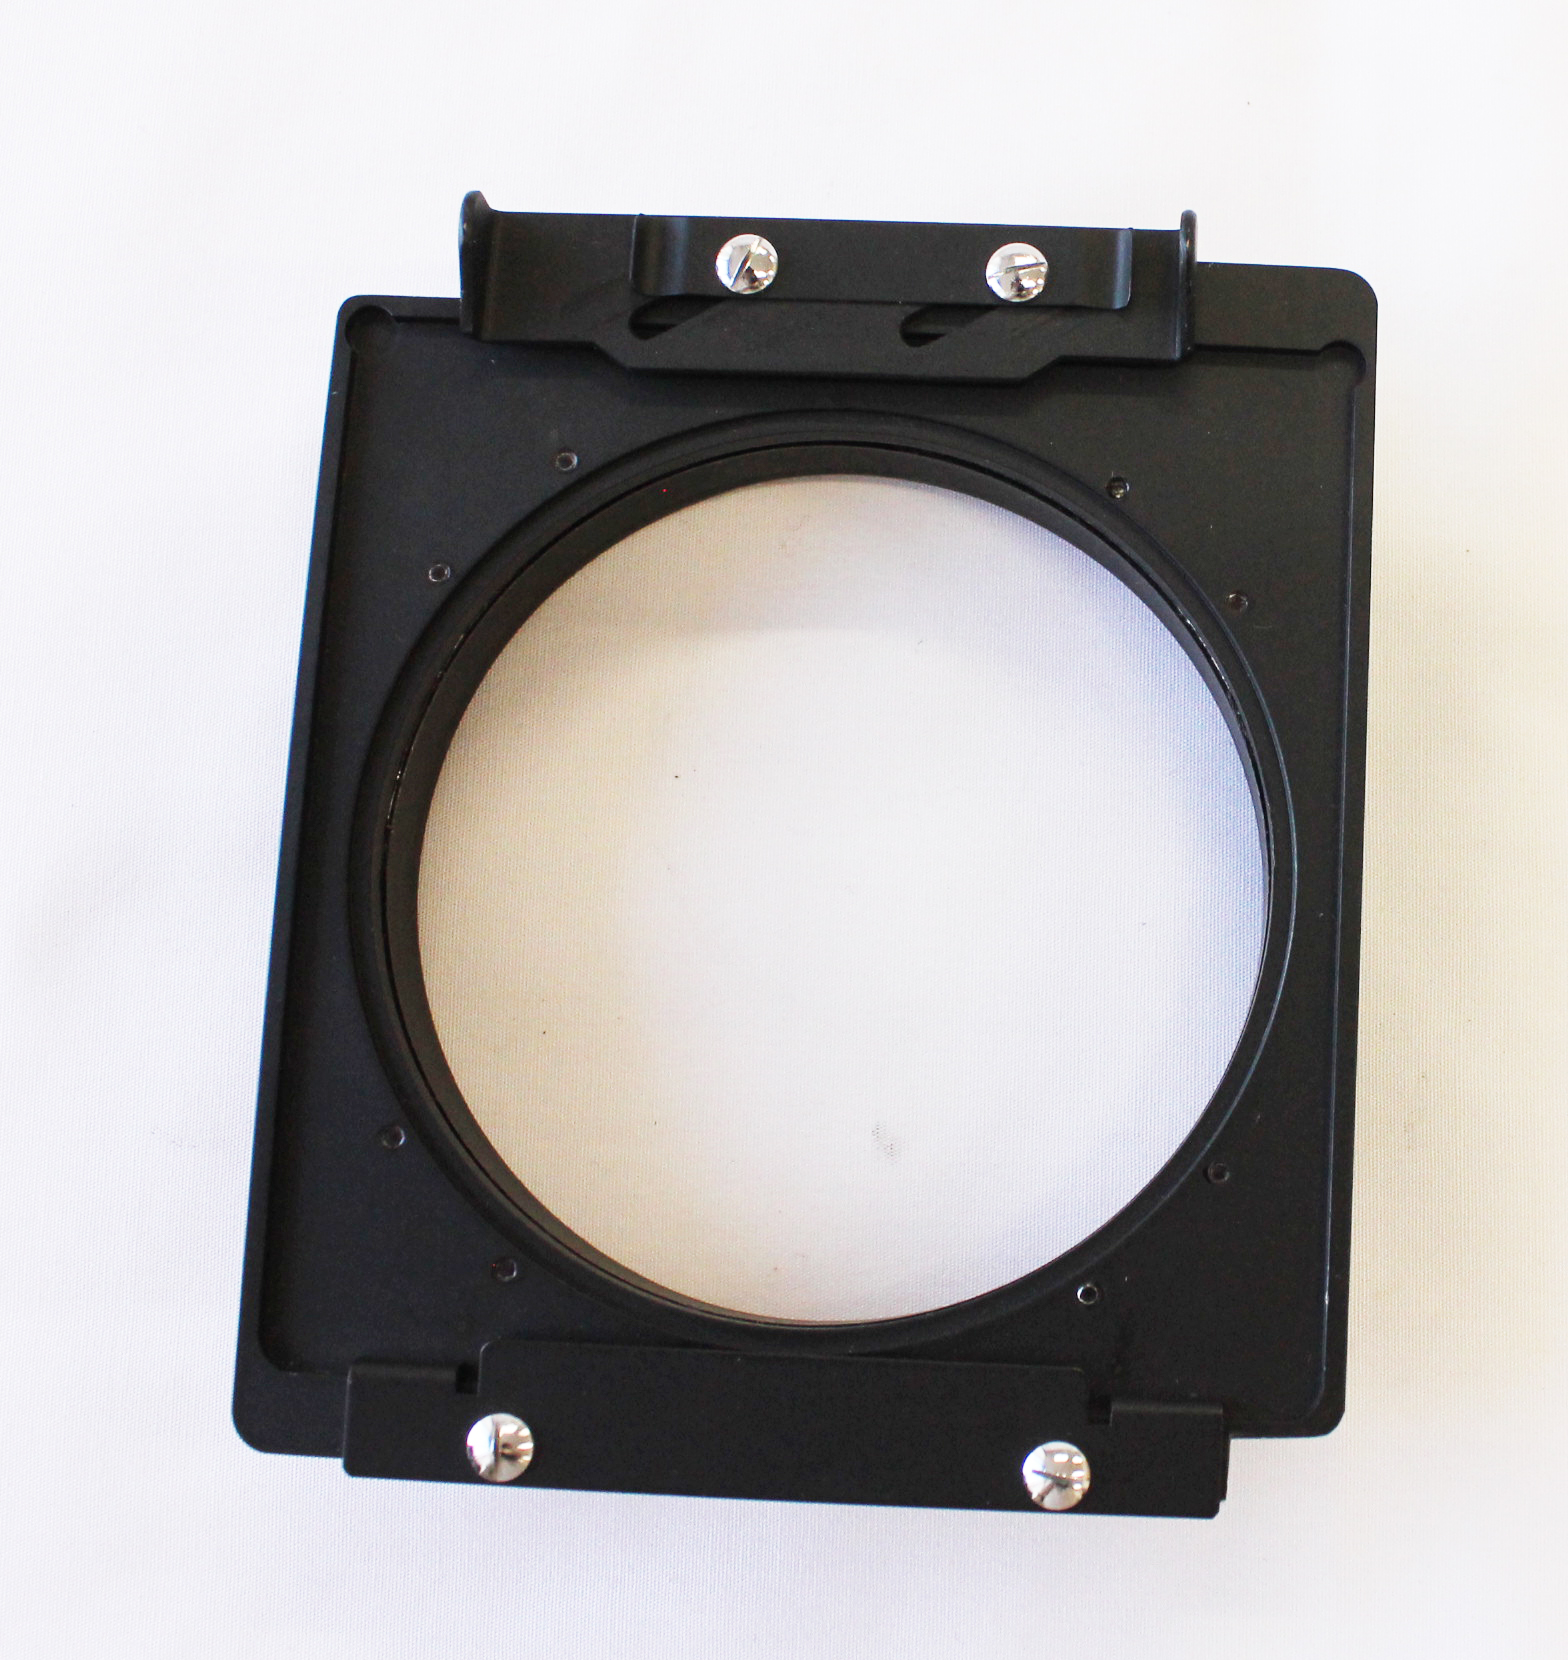 Toyo Linhof Lens Board Adapter for Original Toyo Field 4 3/4 x 6 1/2 Large Format Camera from Japan 